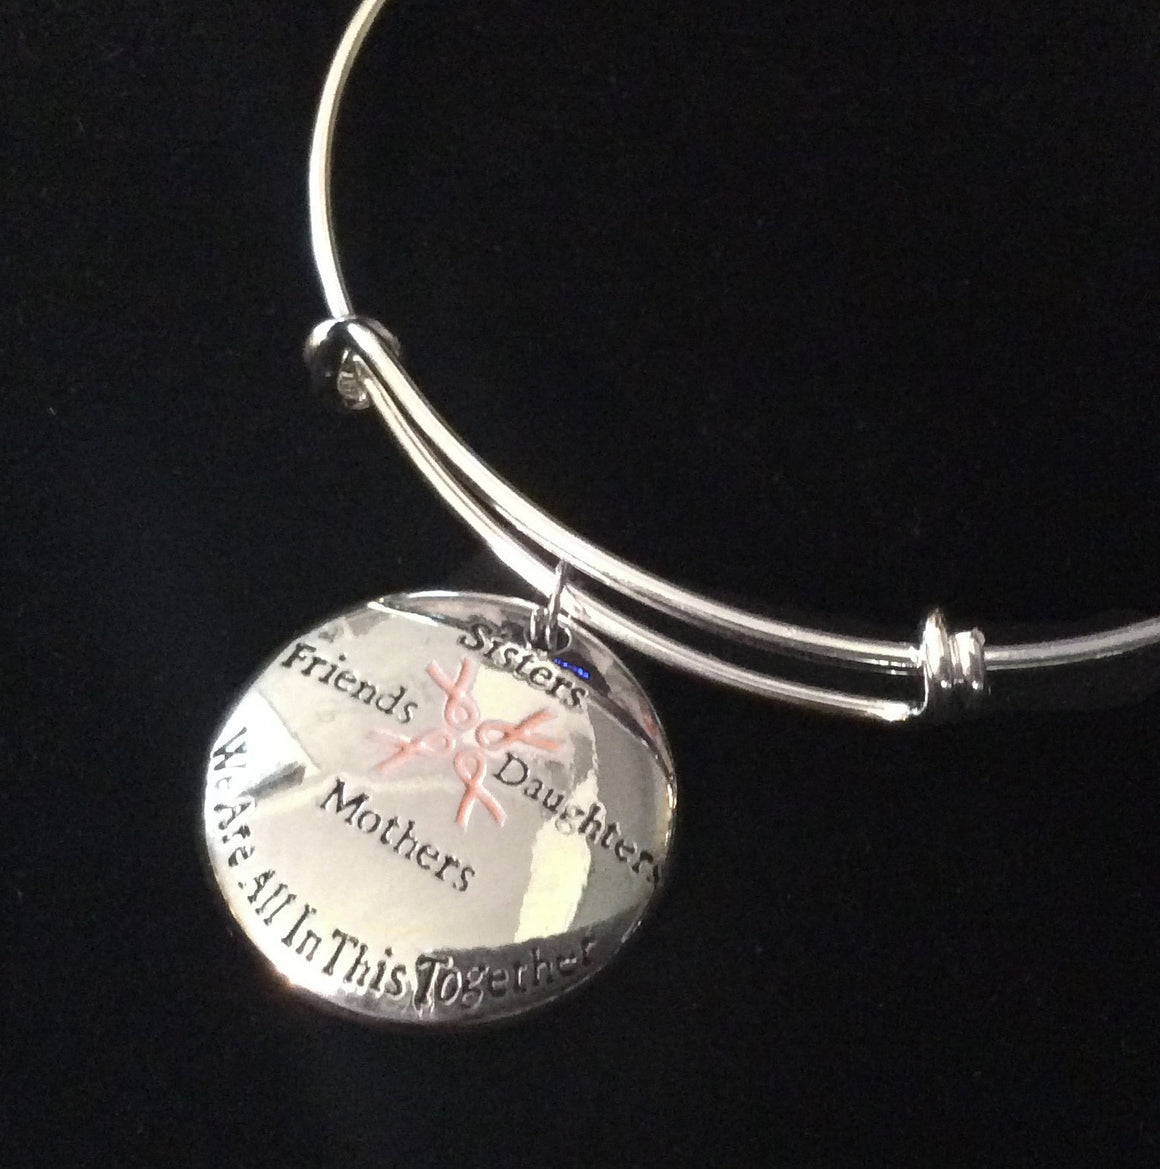 Sisters Friends Mothers Daughter Together Pink Awareness Ribbon Silver Expandable Charm Bracelet Adjustable Bangle Gift Breast Cancer